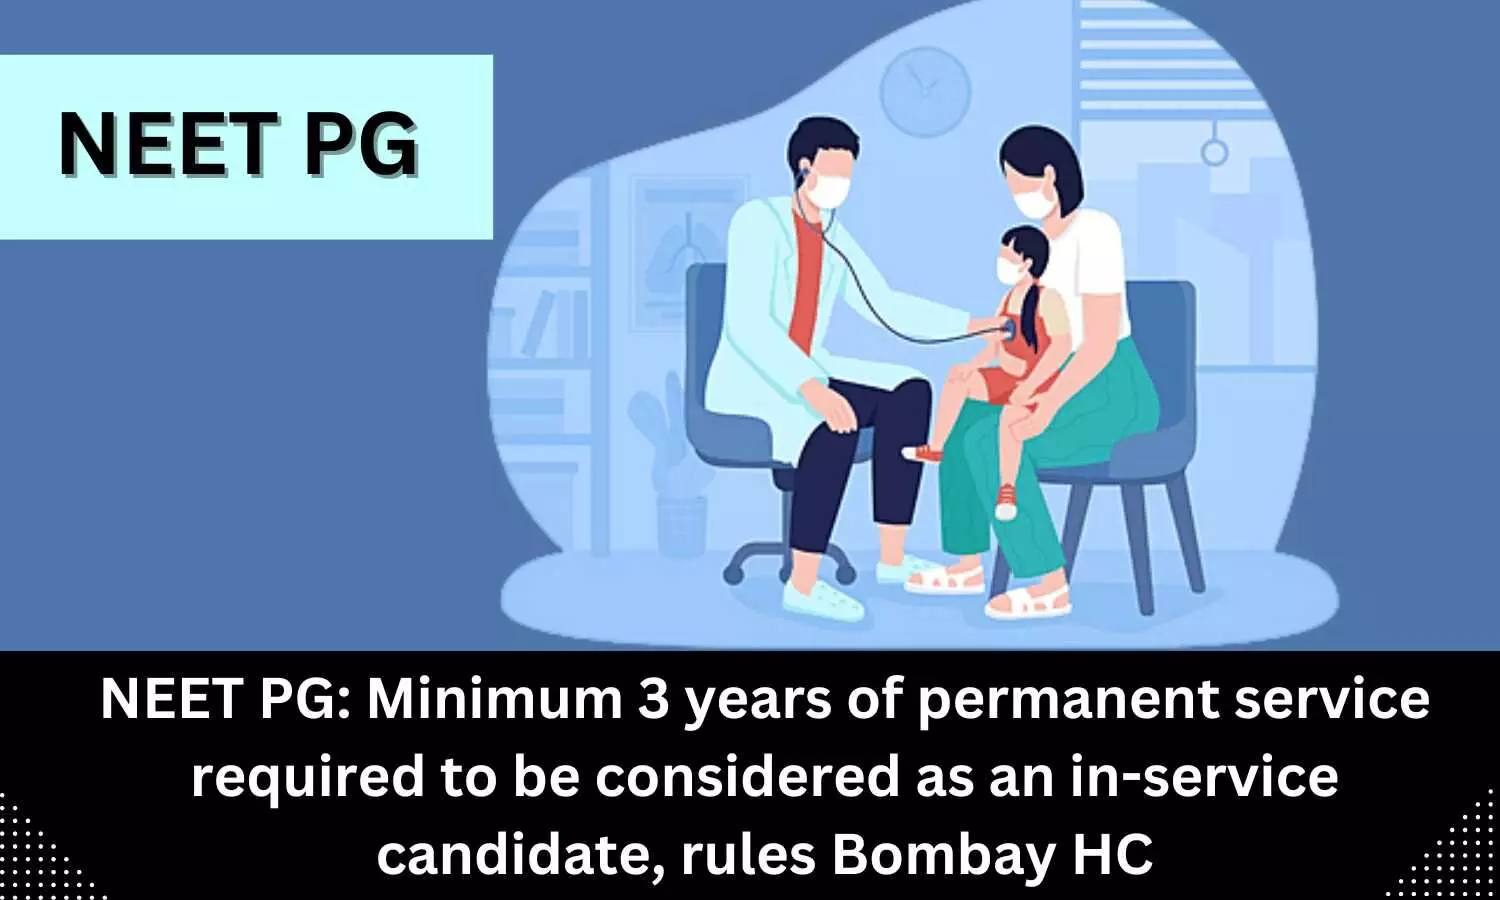 Minimum of three years of permanent service mandatory for being considered as in service NEET PG candidates, reiterates Bombay HC